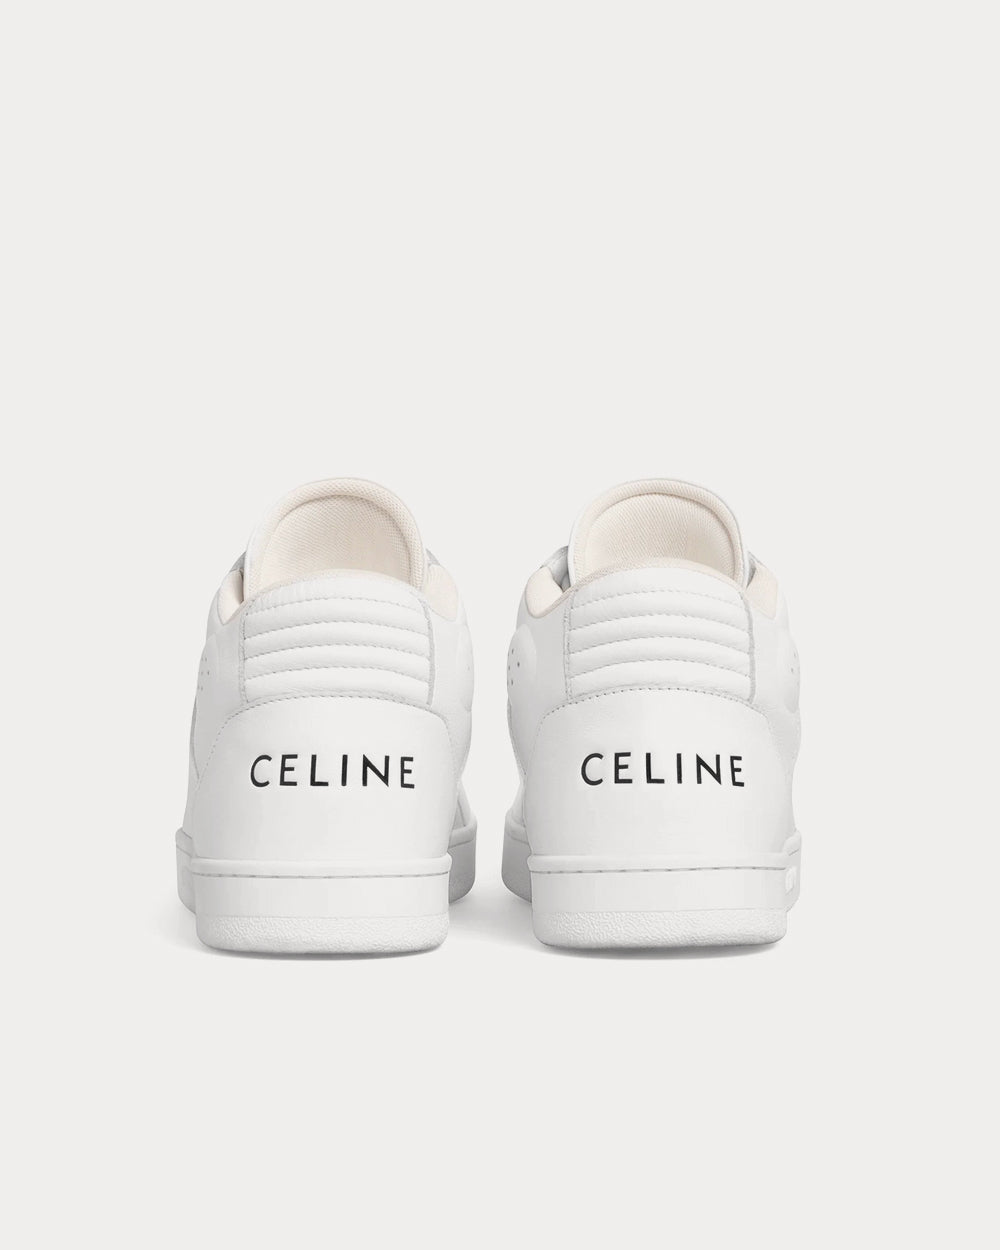 Celine - CT-02 Mid With Scratch In Calfskin Optic White High Top Sneakers